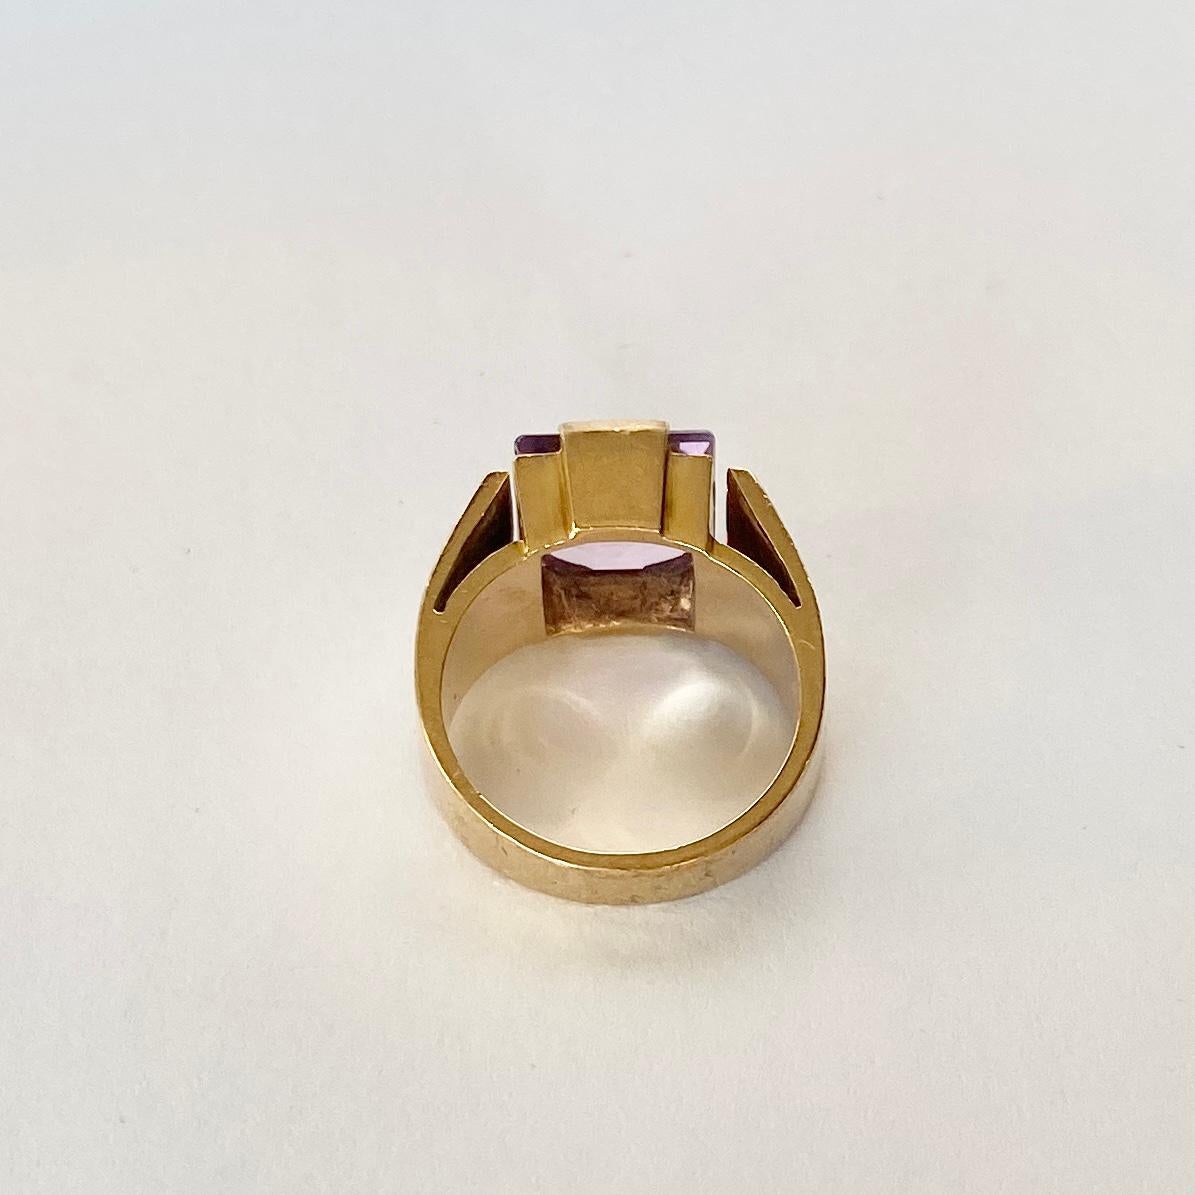 This glossy lilac amethyst stone is surrounded by a frame of gold which compliments perfectly. Modelled in 9carat gold. 

Ring Size: M or 6 1/4
Stone Dimensions: 10x10mm 

Weight: 7.7g